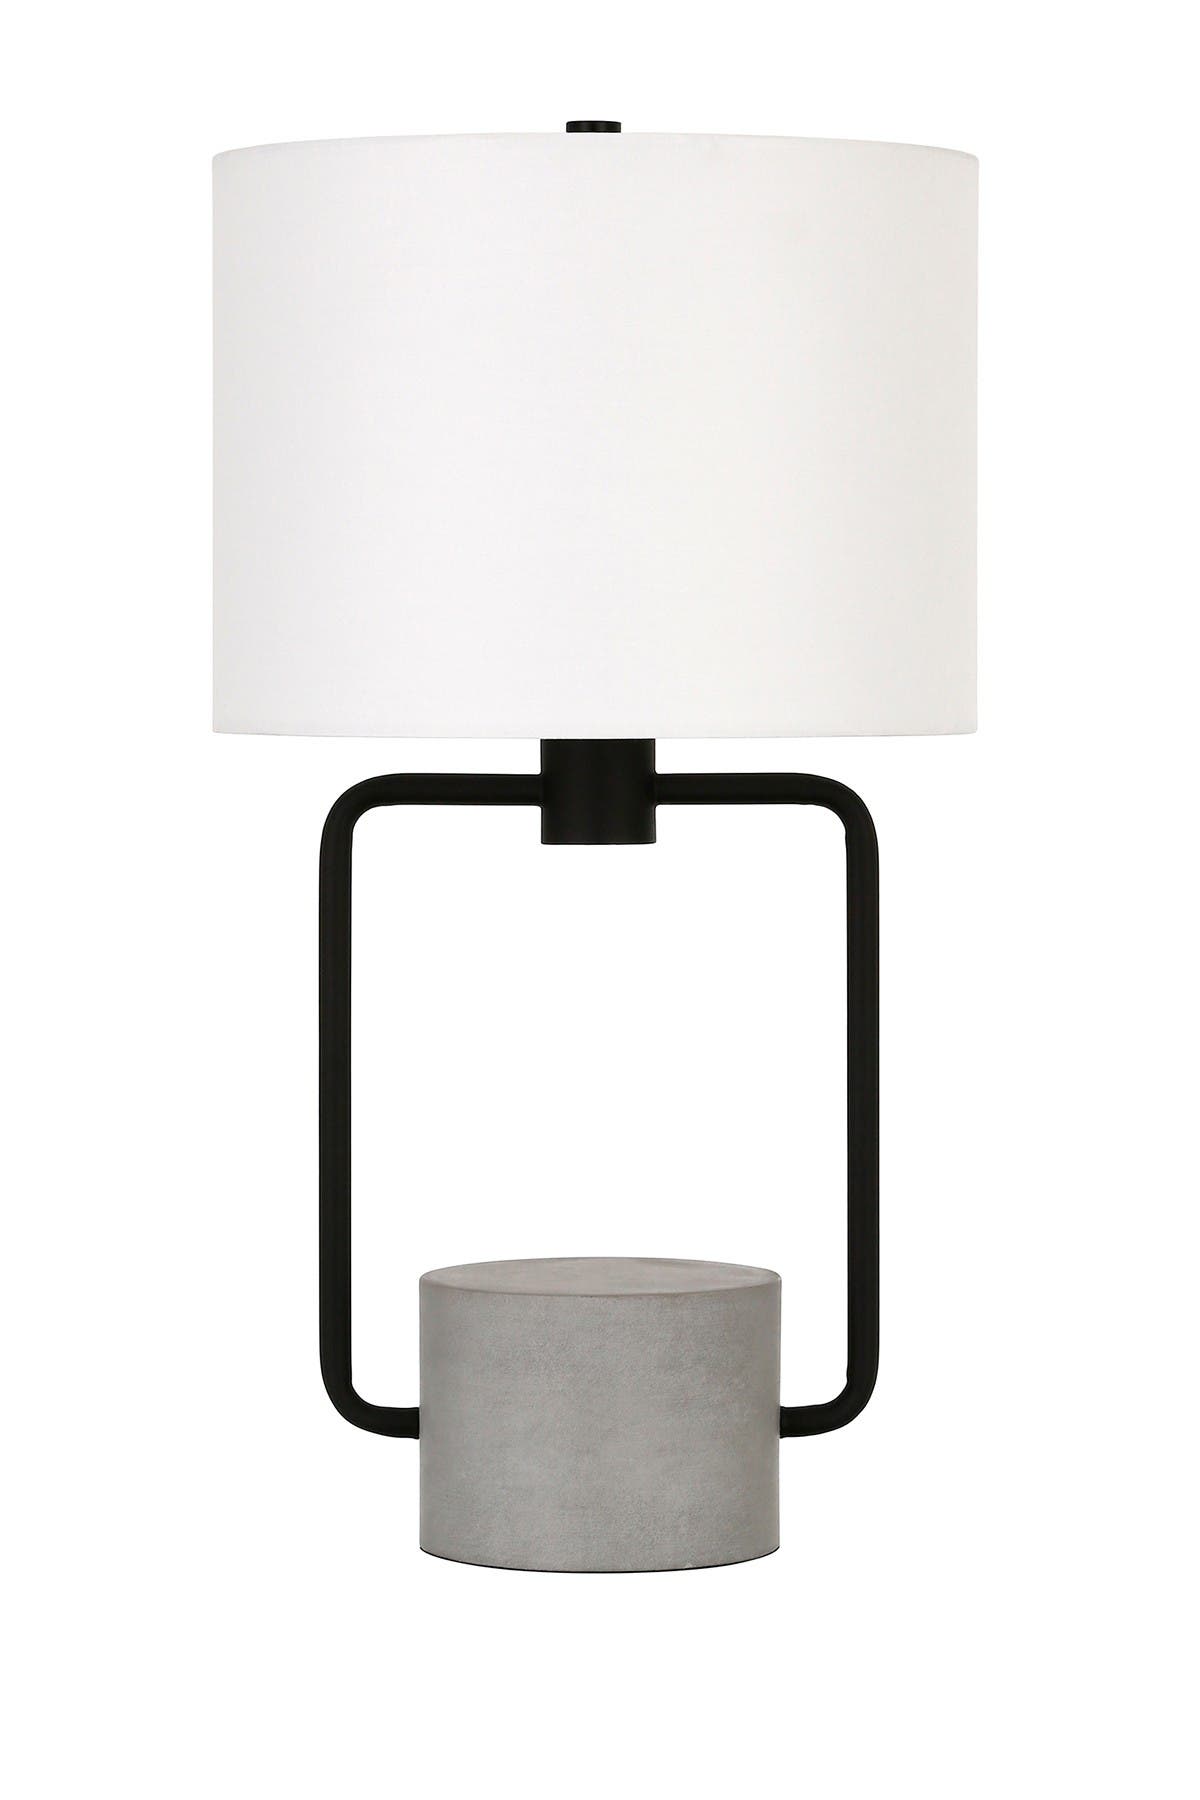 Addison And Lane Howland Blackened Bronze And Concrete Table Lamp In Black/concrete